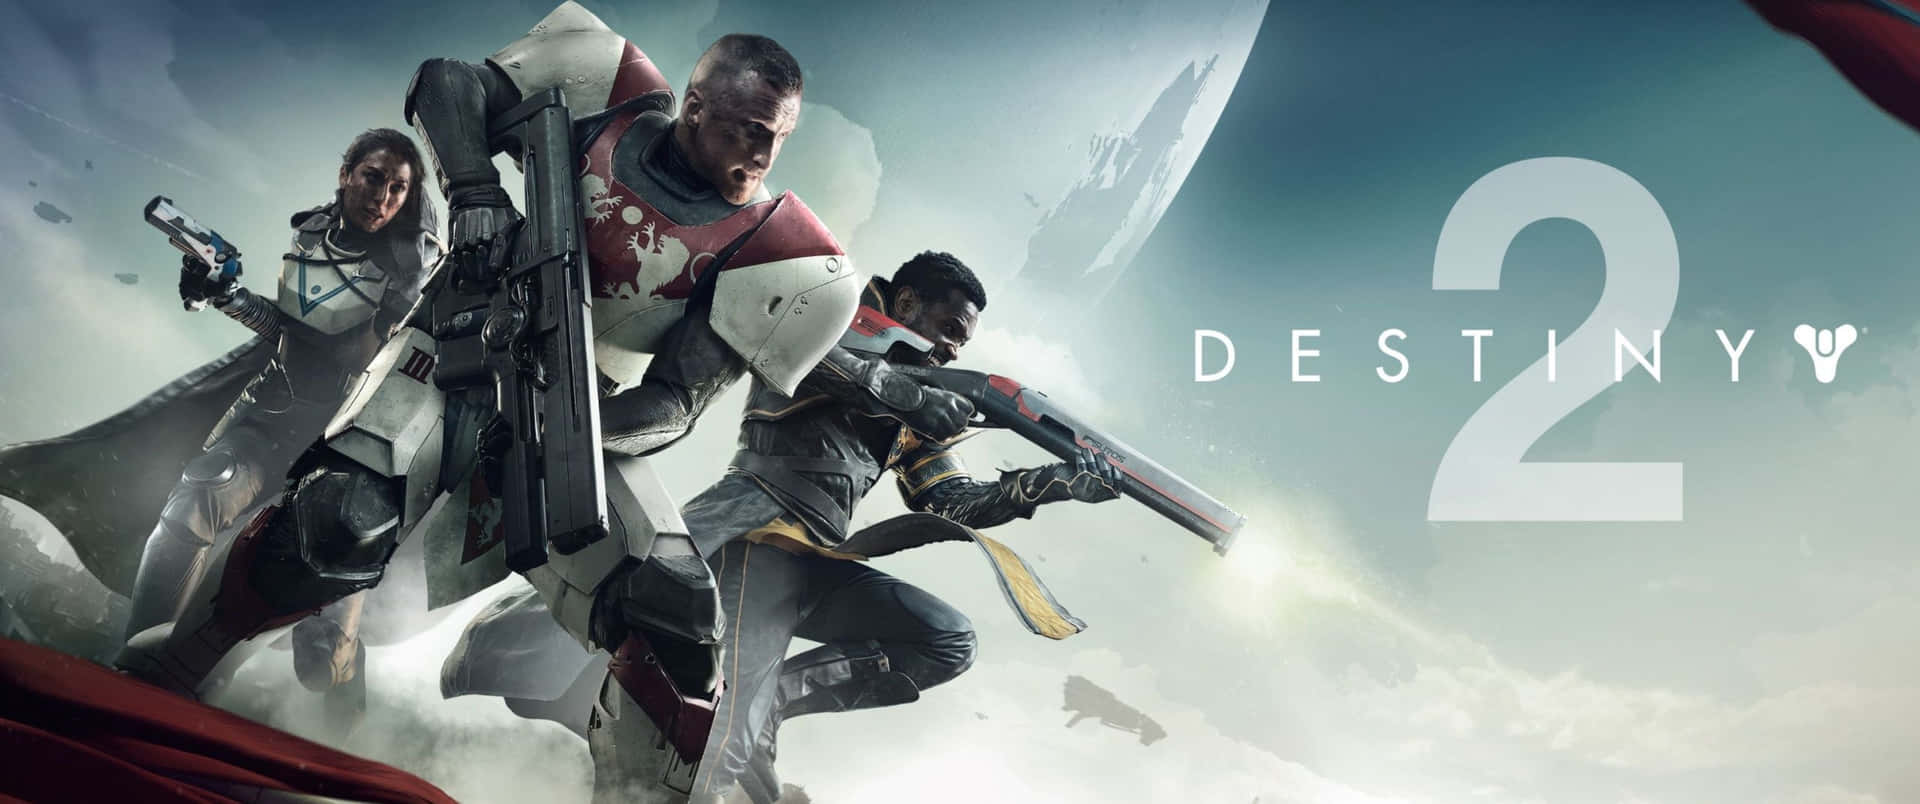 "Travel Beyond Time and Space With Destiny 2"